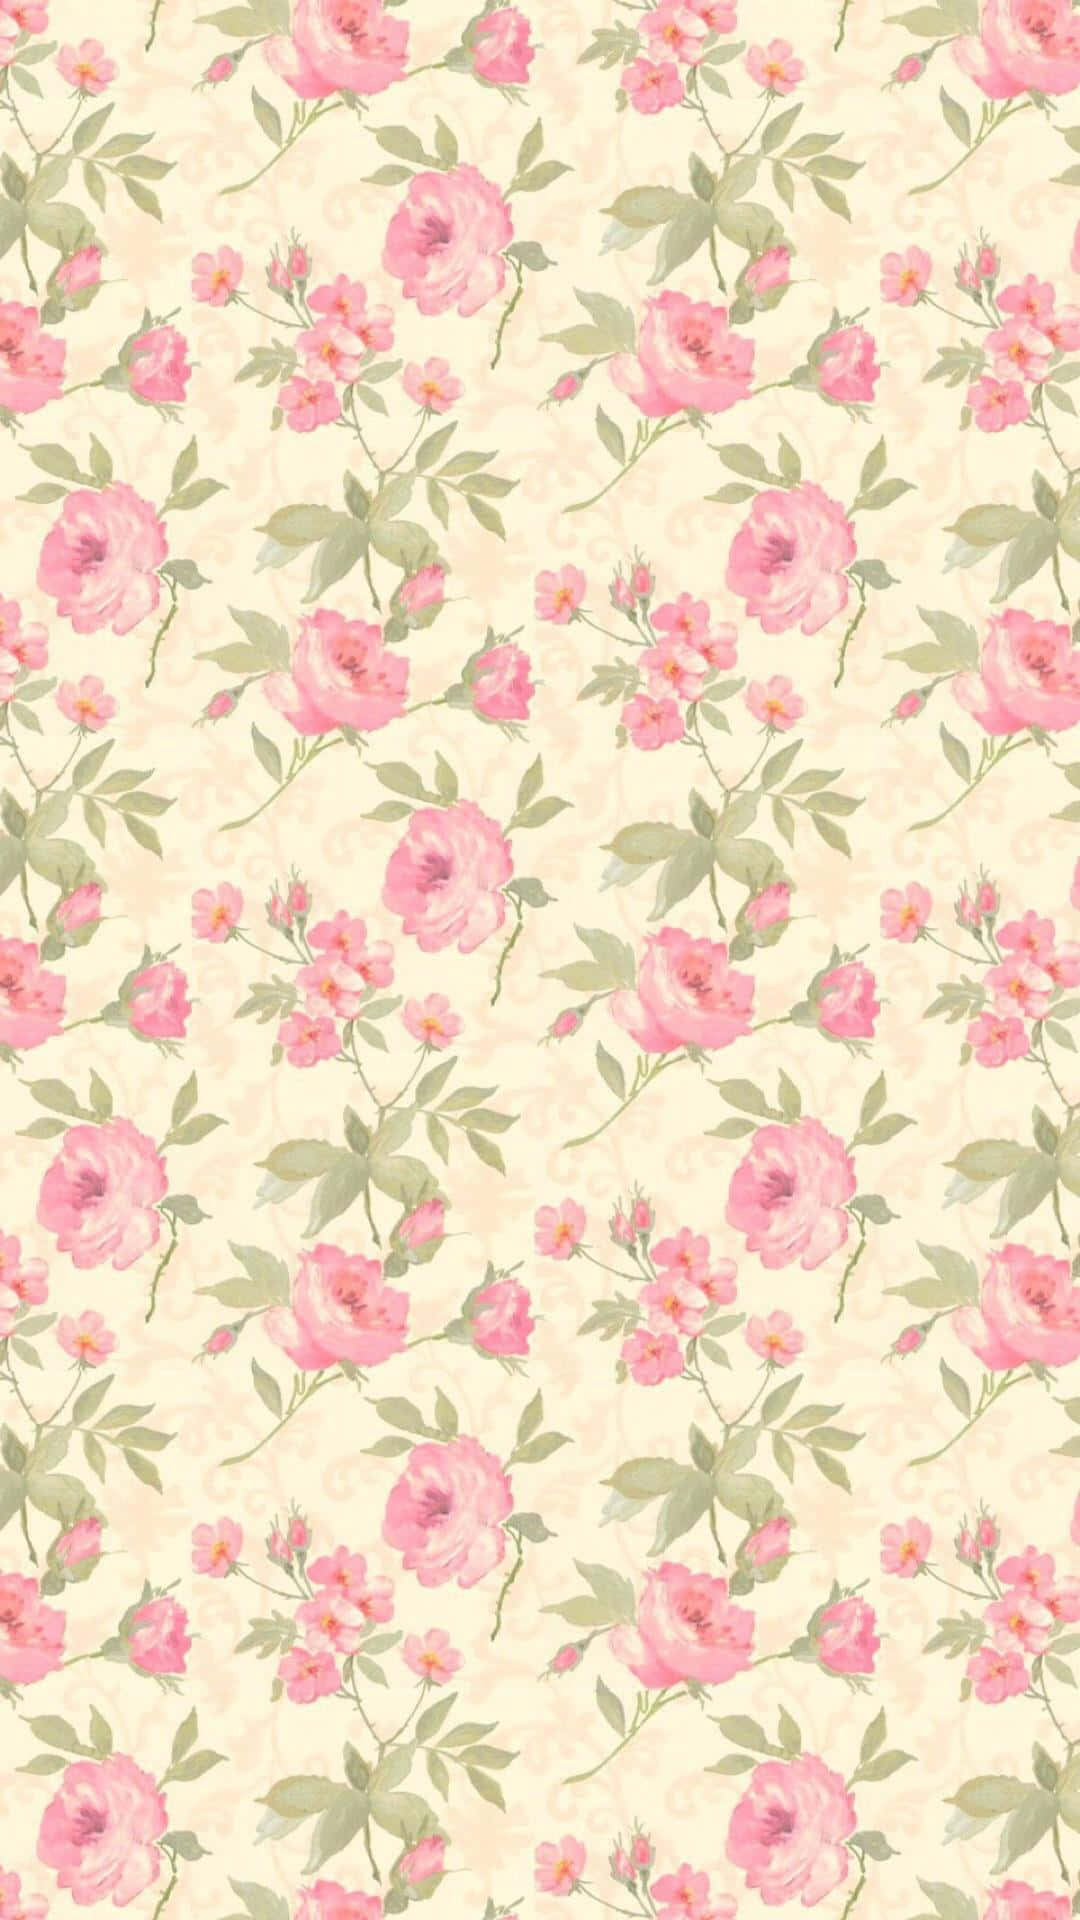 A Pink Floral Pattern On A Beige Background